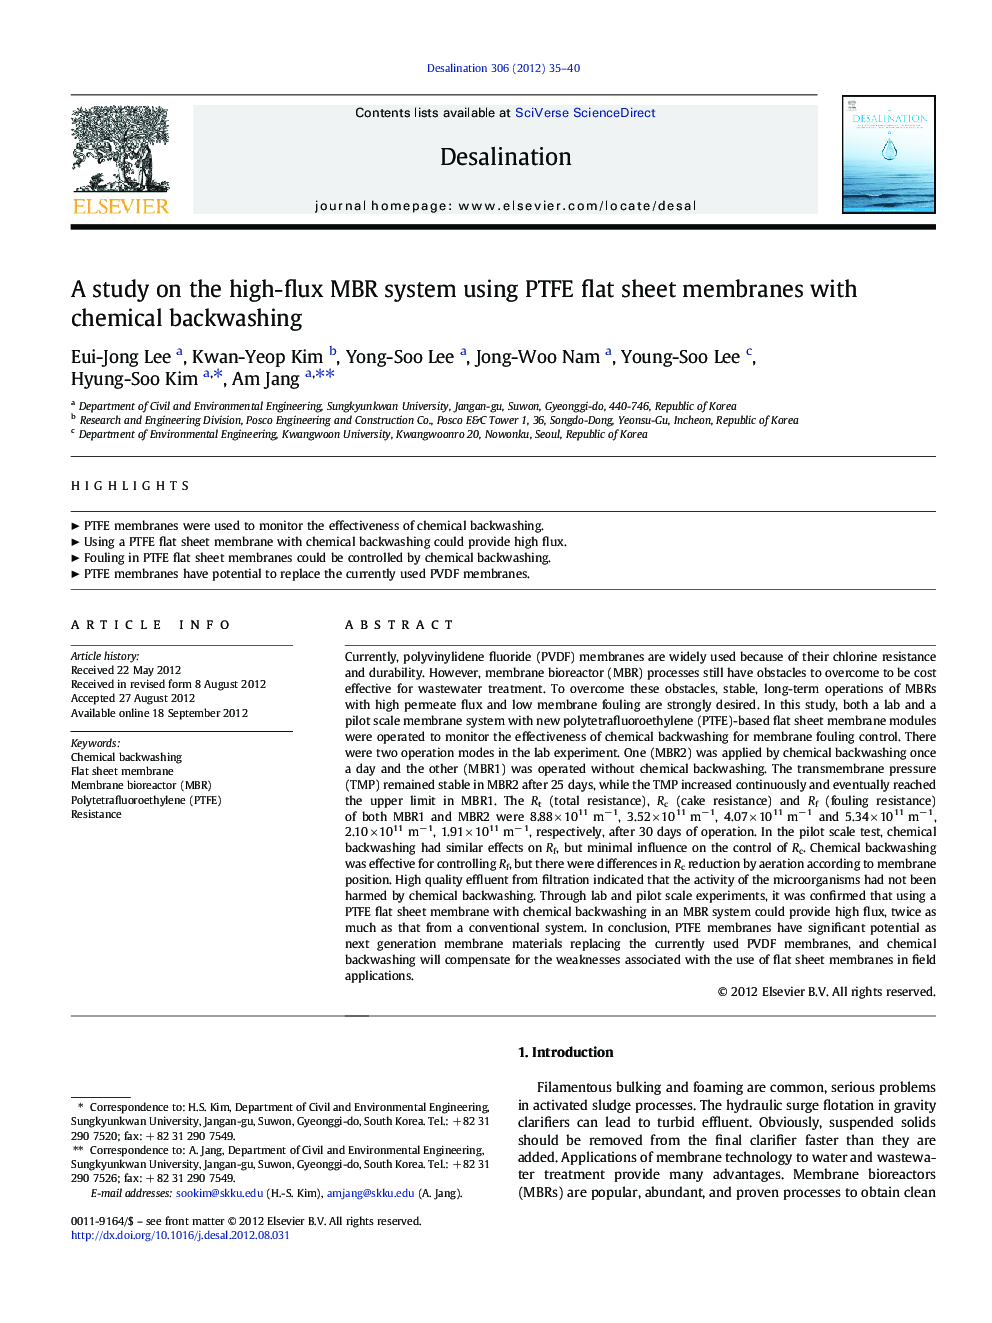 A study on the high-flux MBR system using PTFE flat sheet membranes with chemical backwashing